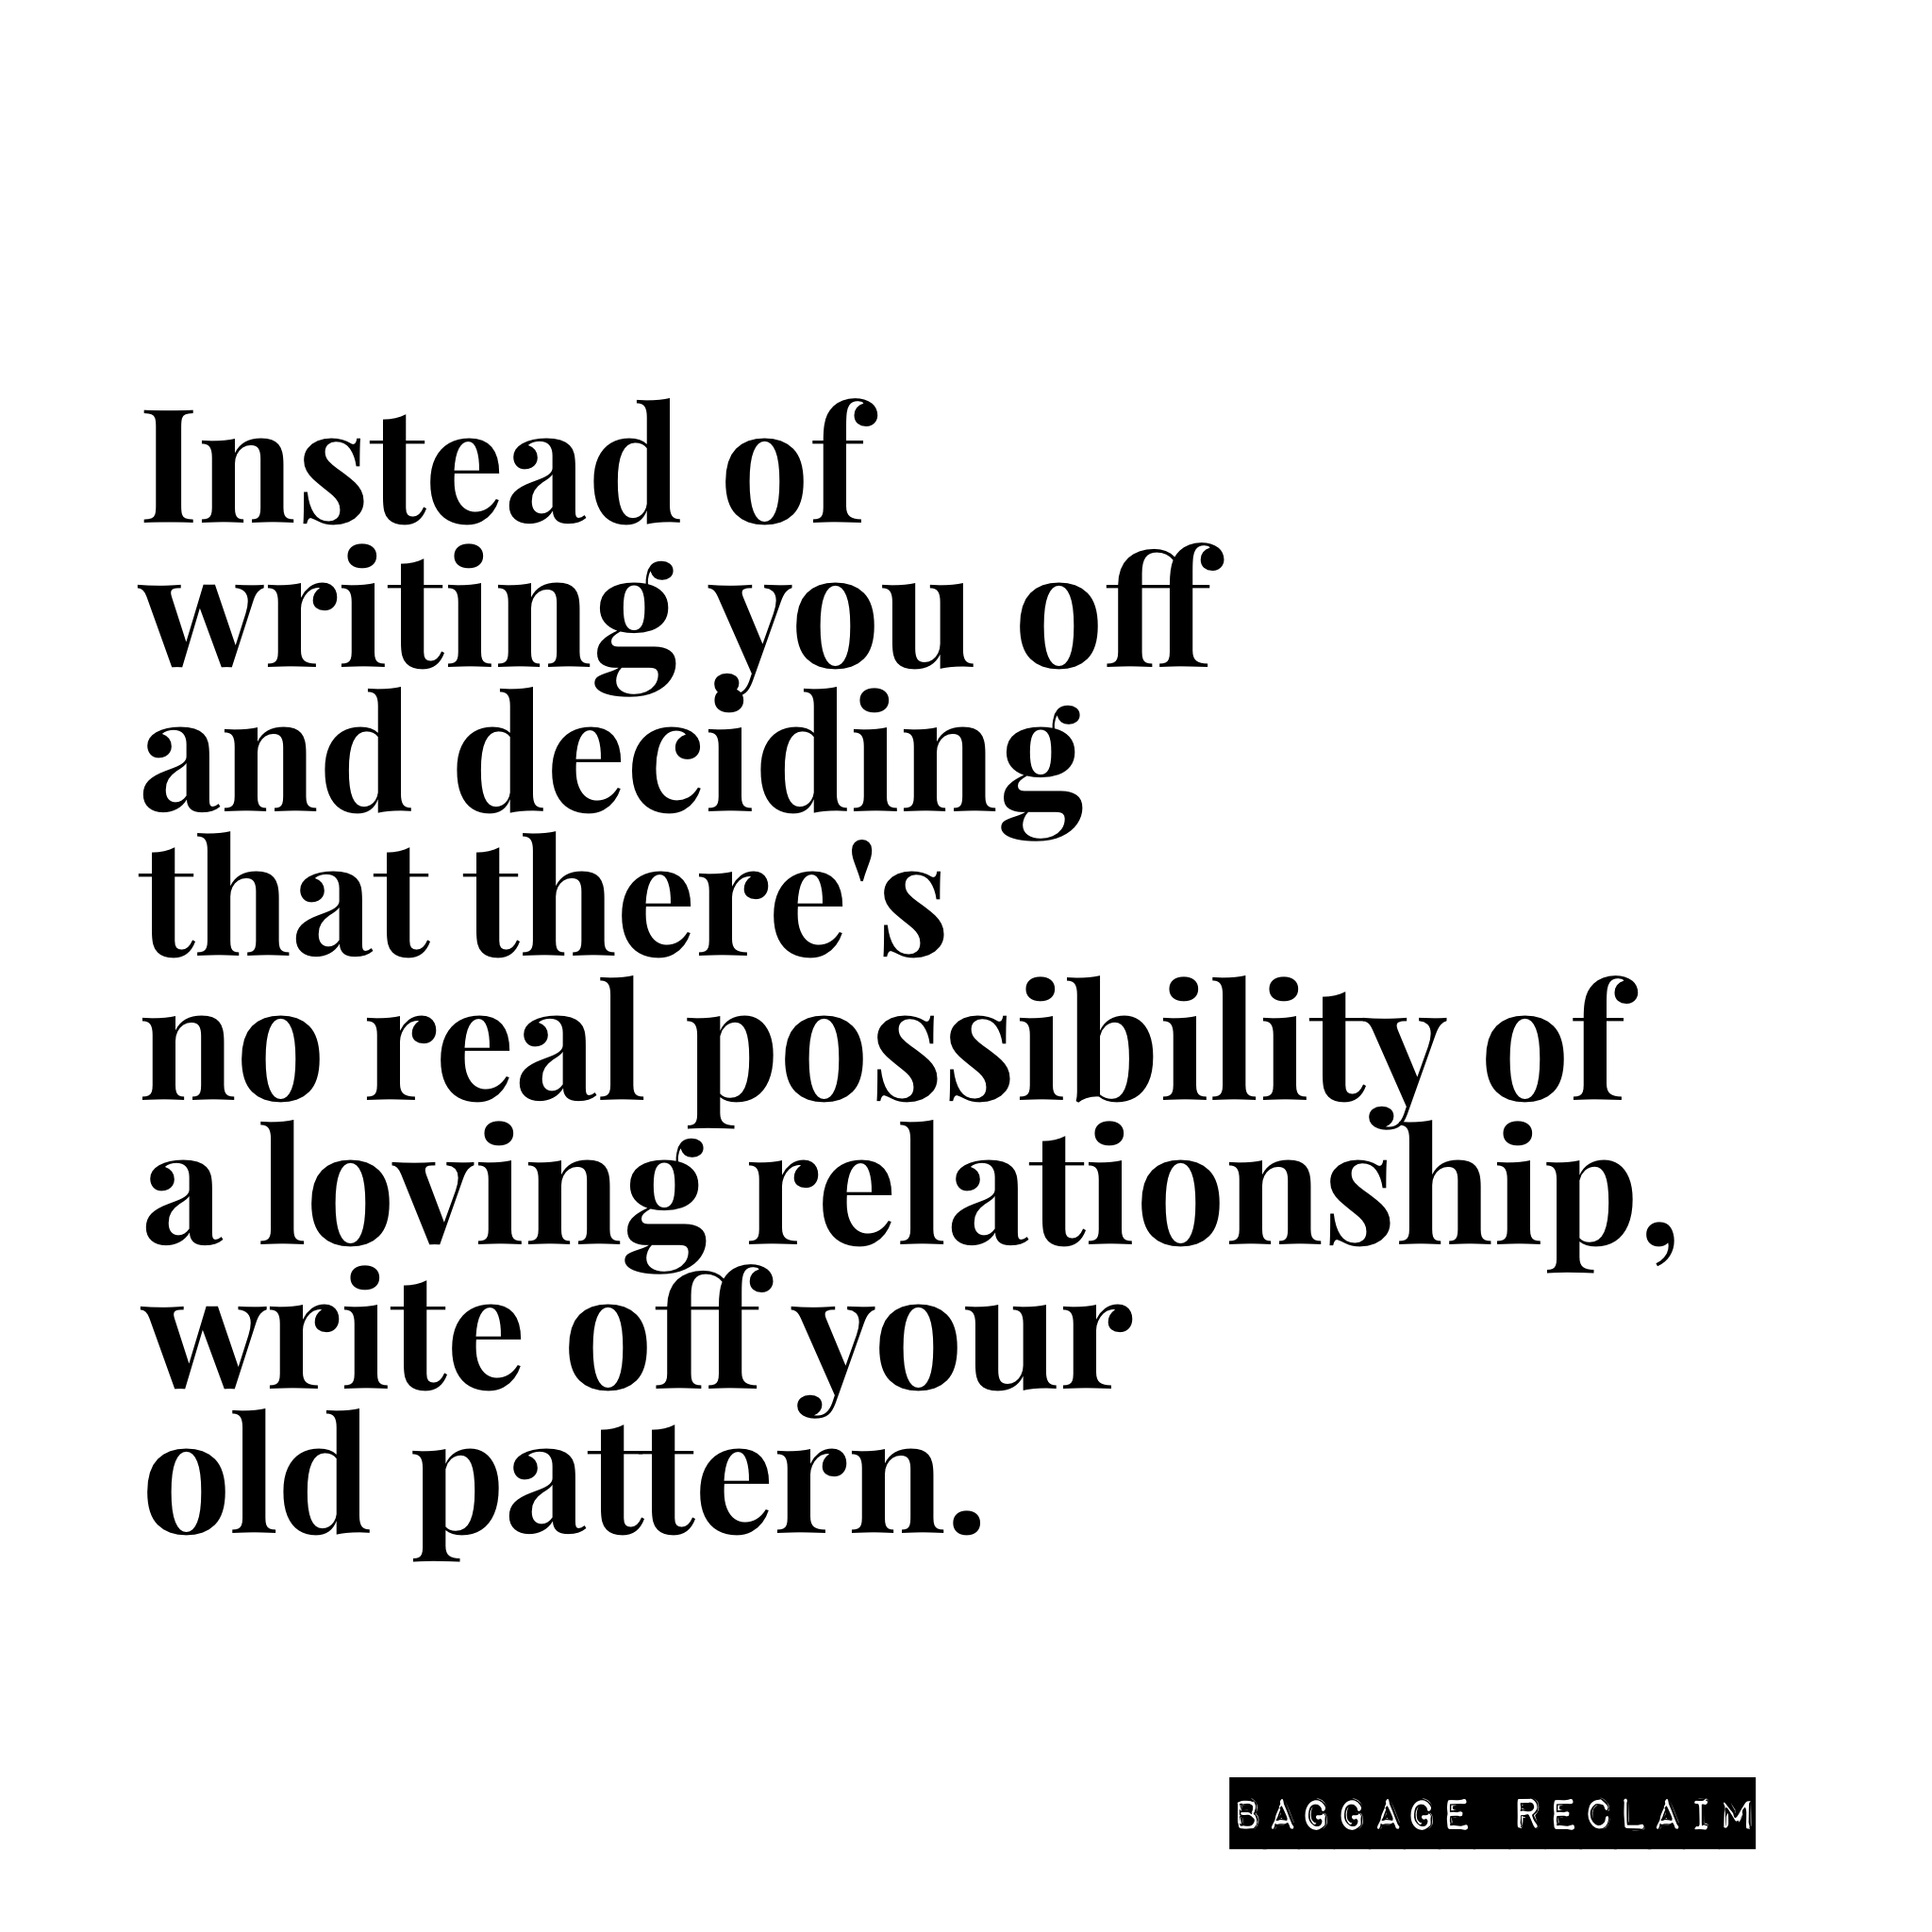 Instead of writing you off and deciding that there's no real possibility of a loving relationship, write off your old pattern.